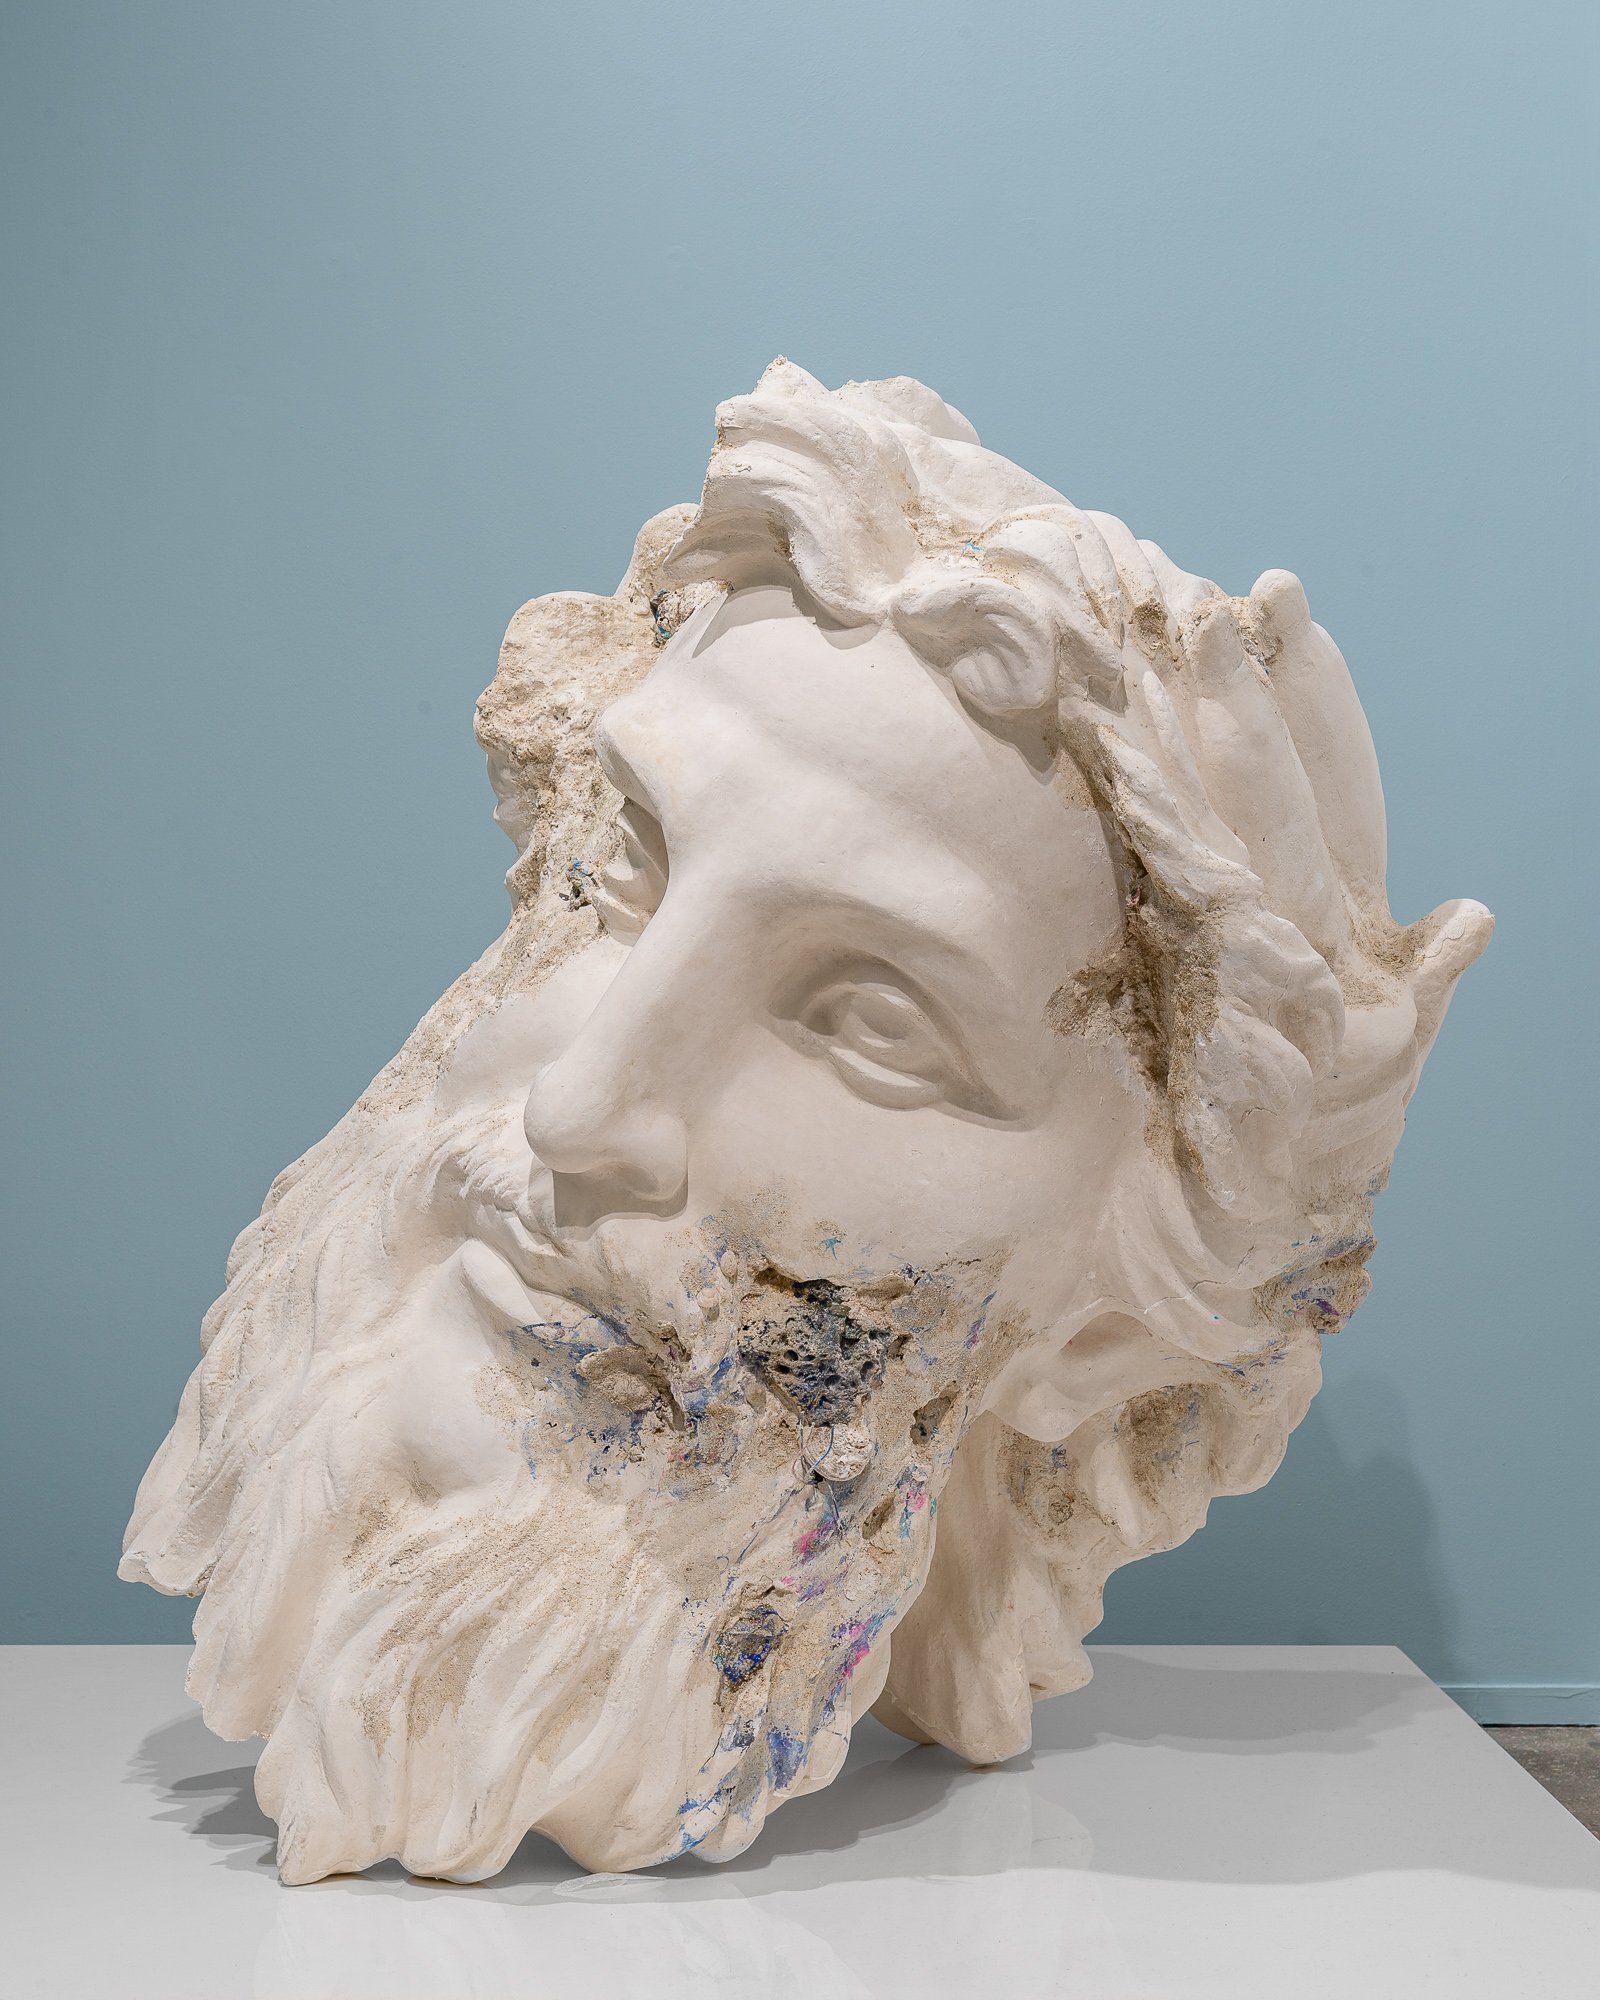   Neptune , 2021  Resin, plaster and recycled materials  125 x 125 x 110 cm   N°1/1 + 1 EA   INQUIRY  